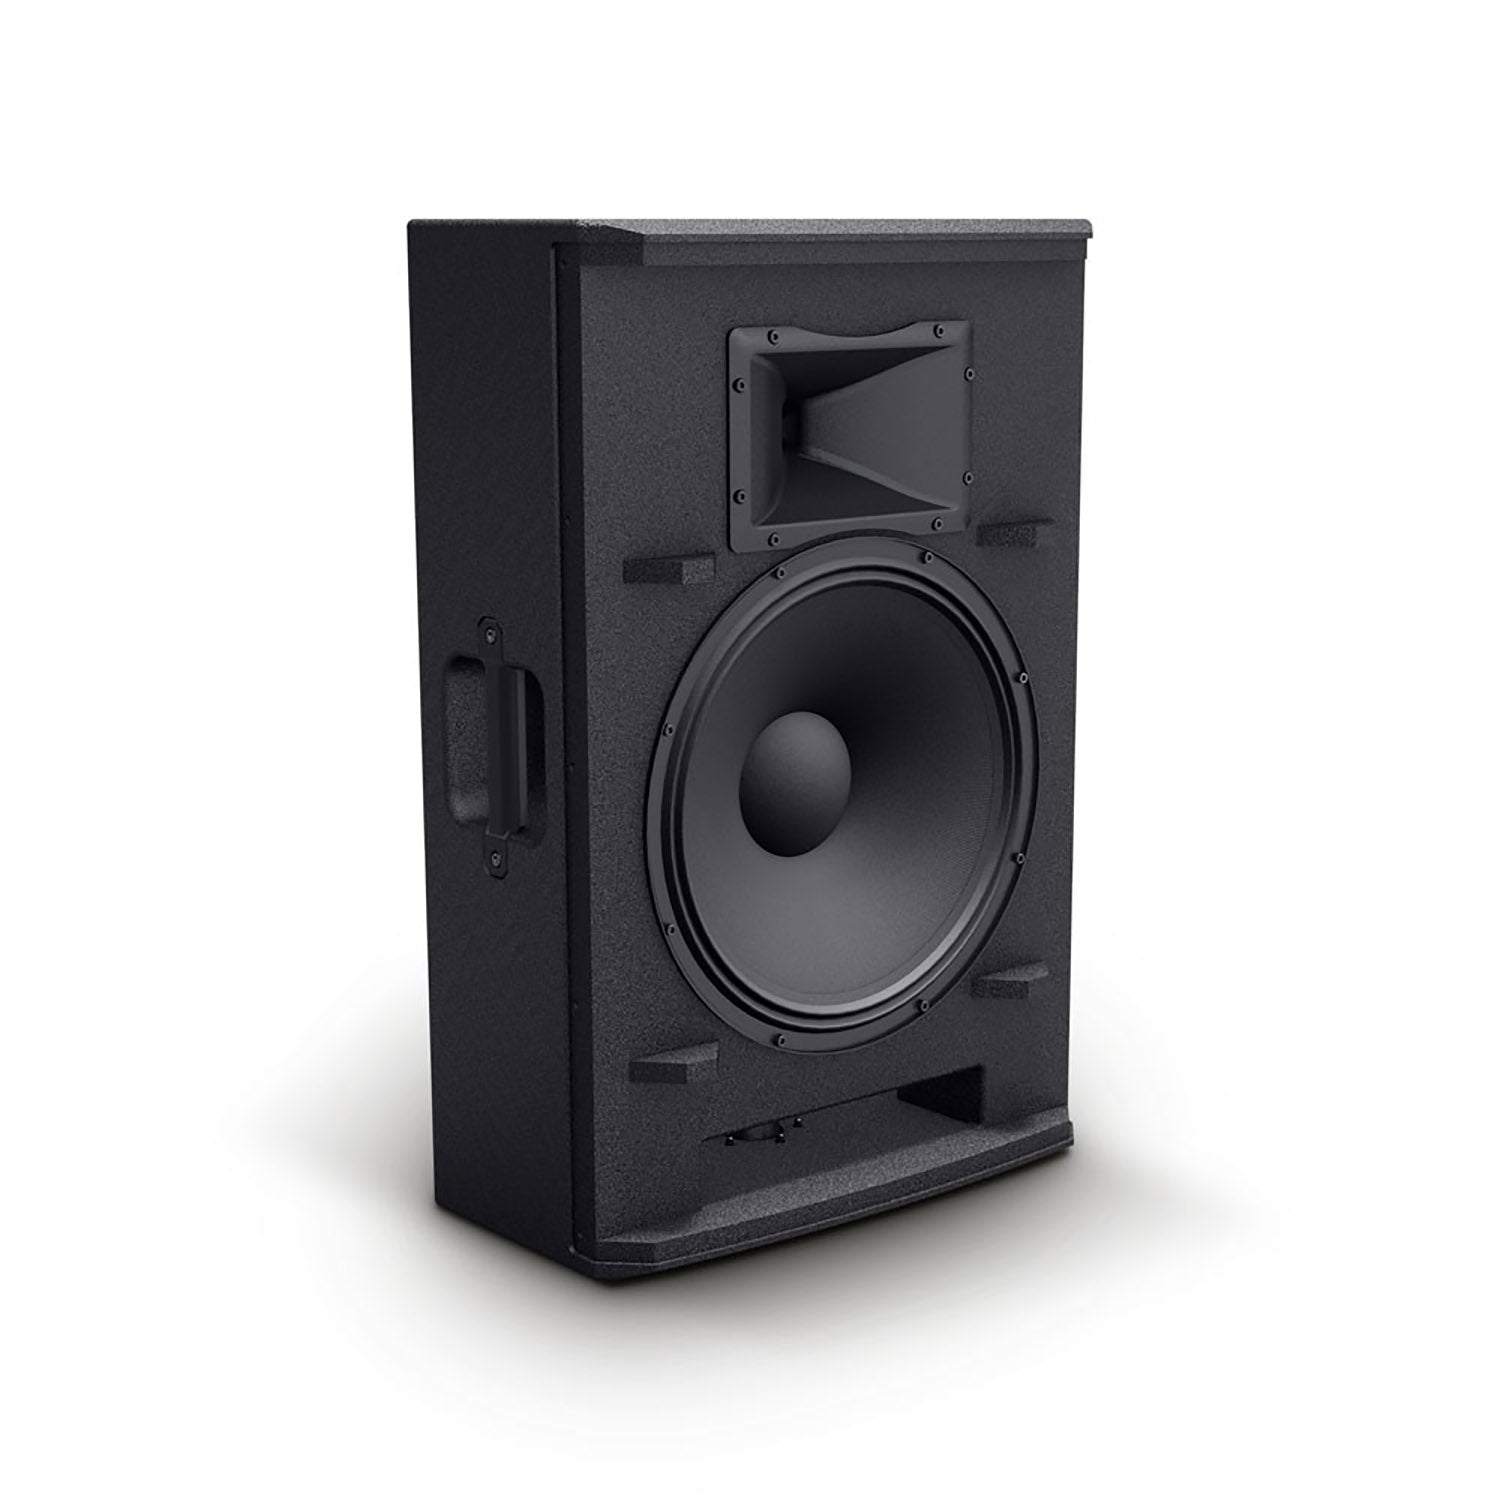 LD Systems STINGER 15 G3, 15 Inches Passive PA Speaker - Hollywood DJ